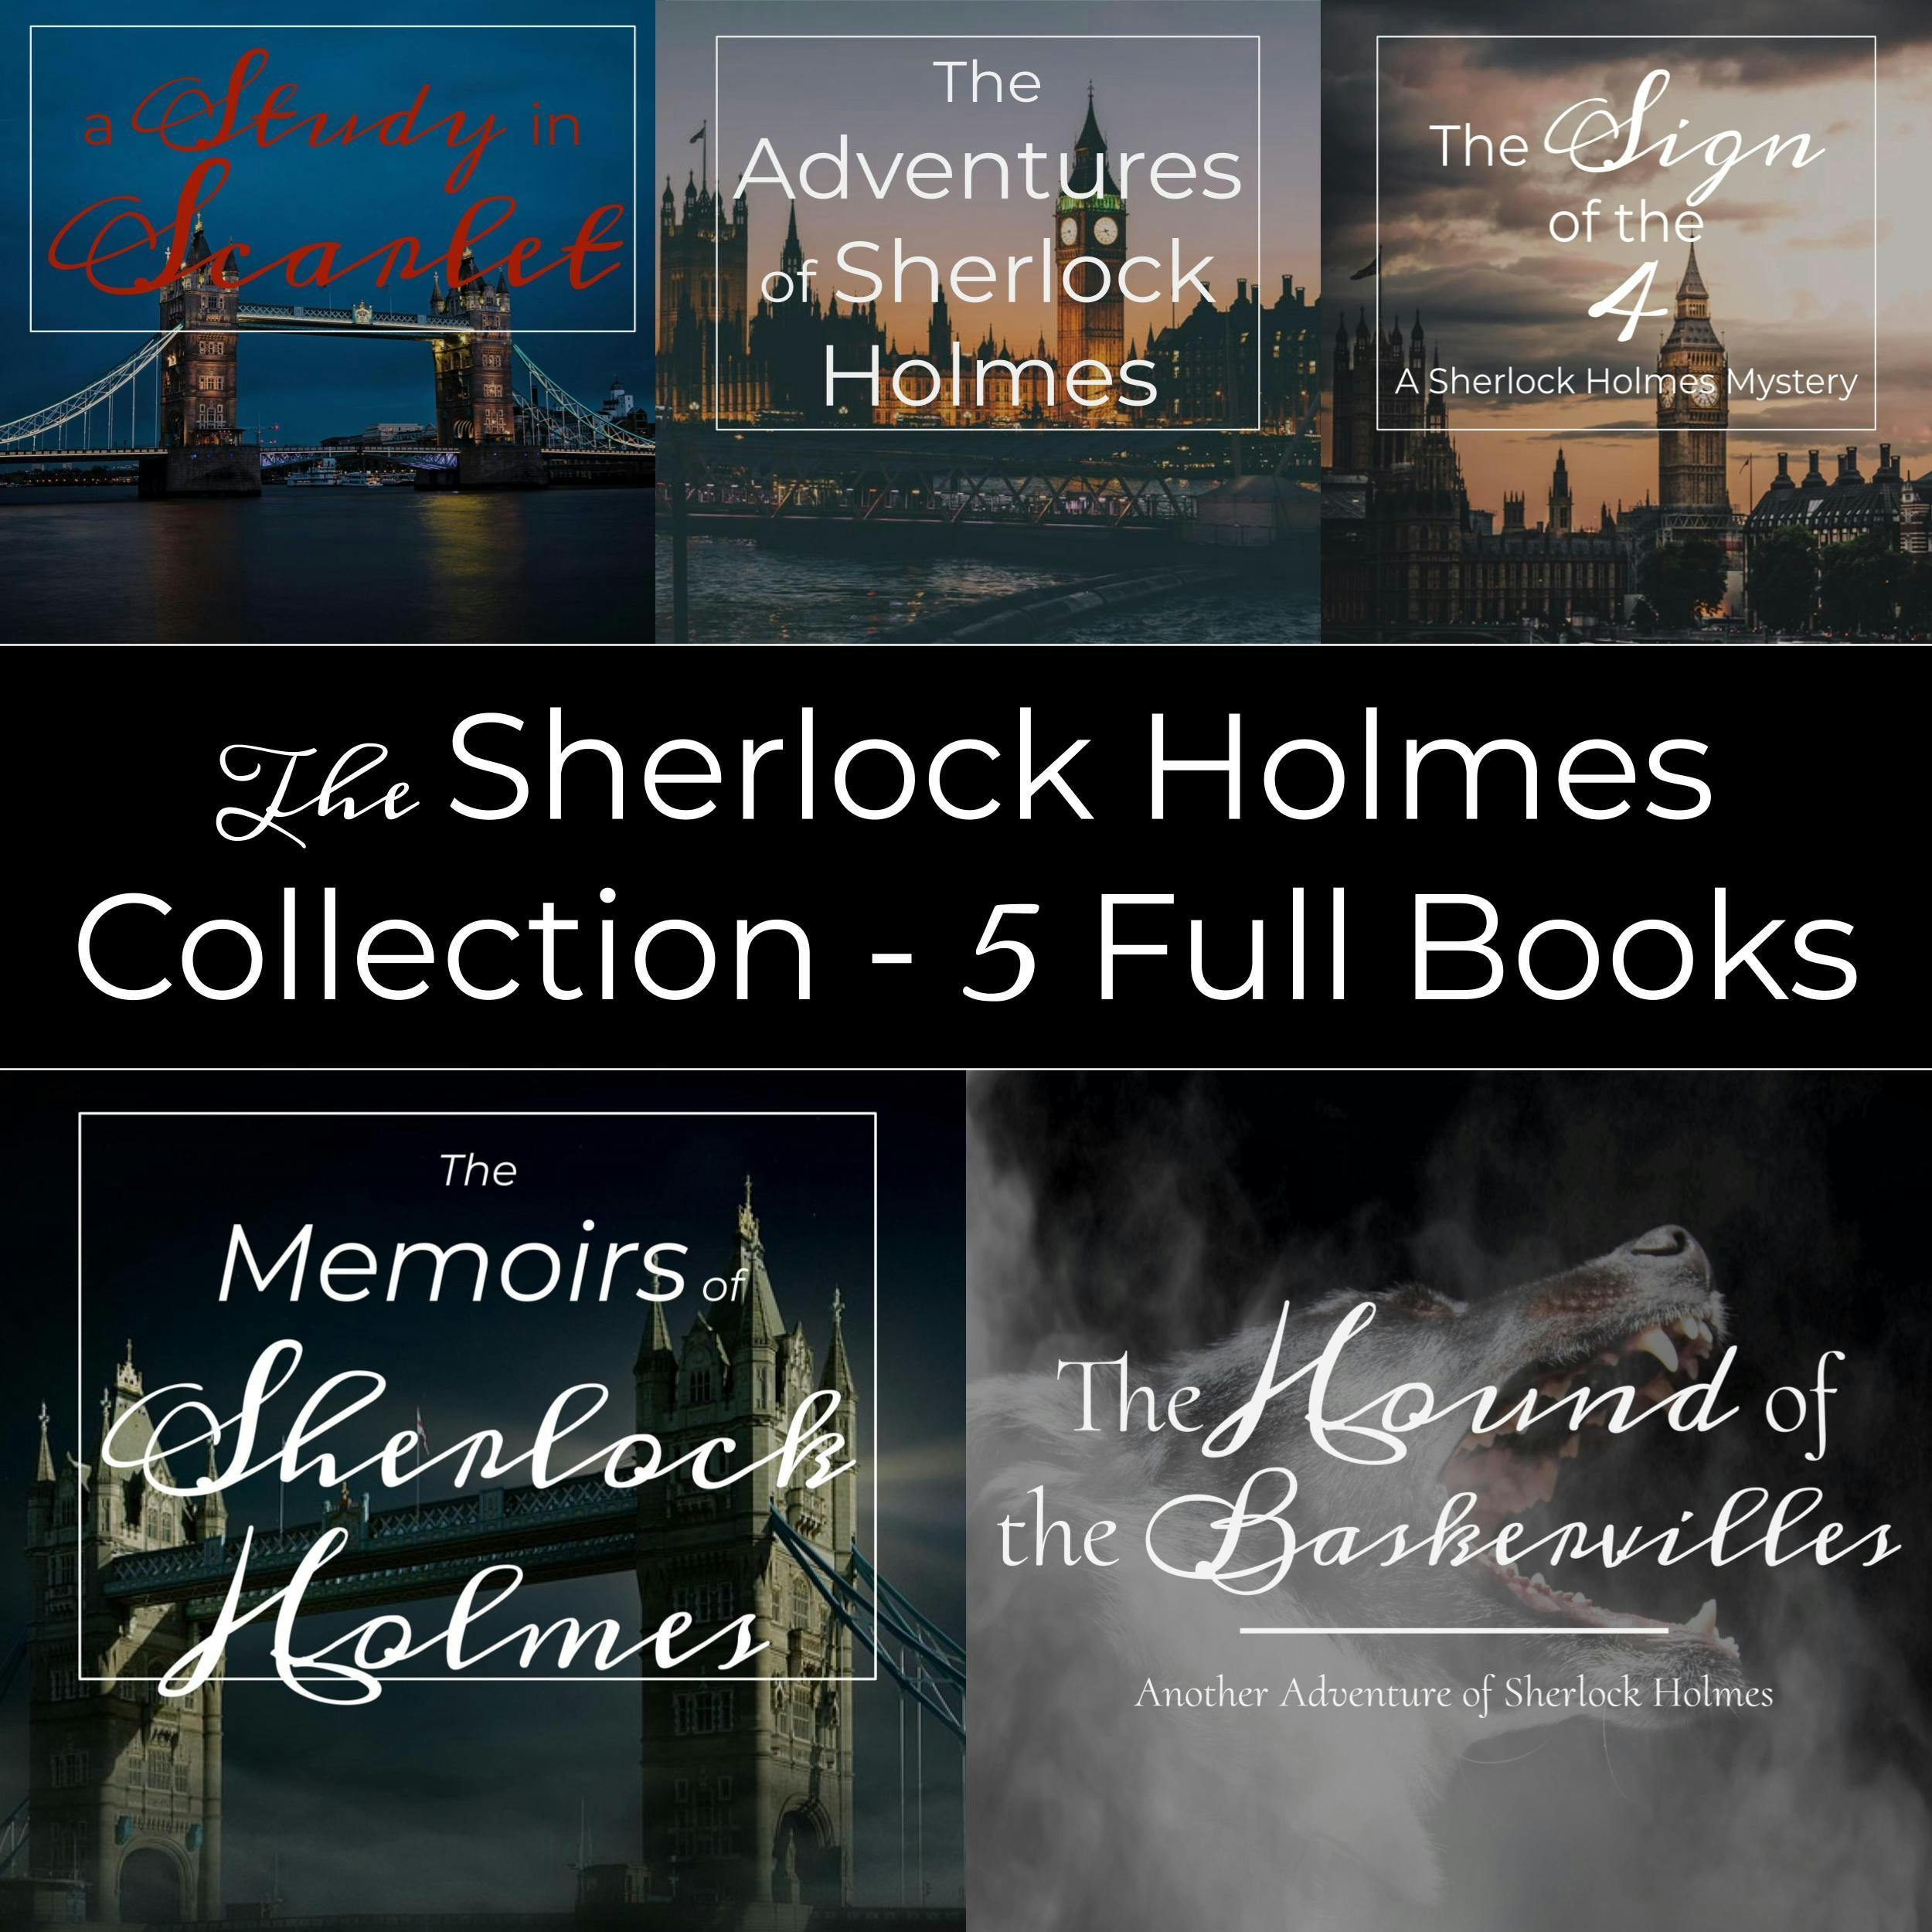 Sherlock Holmes Collection - 5 Full Audiobooks: Unabridged Audiobooks of A Study in Scarlet, The Adventures of Sherlock Holmes, The Sign of the Four, The Memoirs of Sherlock Holmes, and The Hound of the Baskervilles - Sir Arthur Conan Doyle